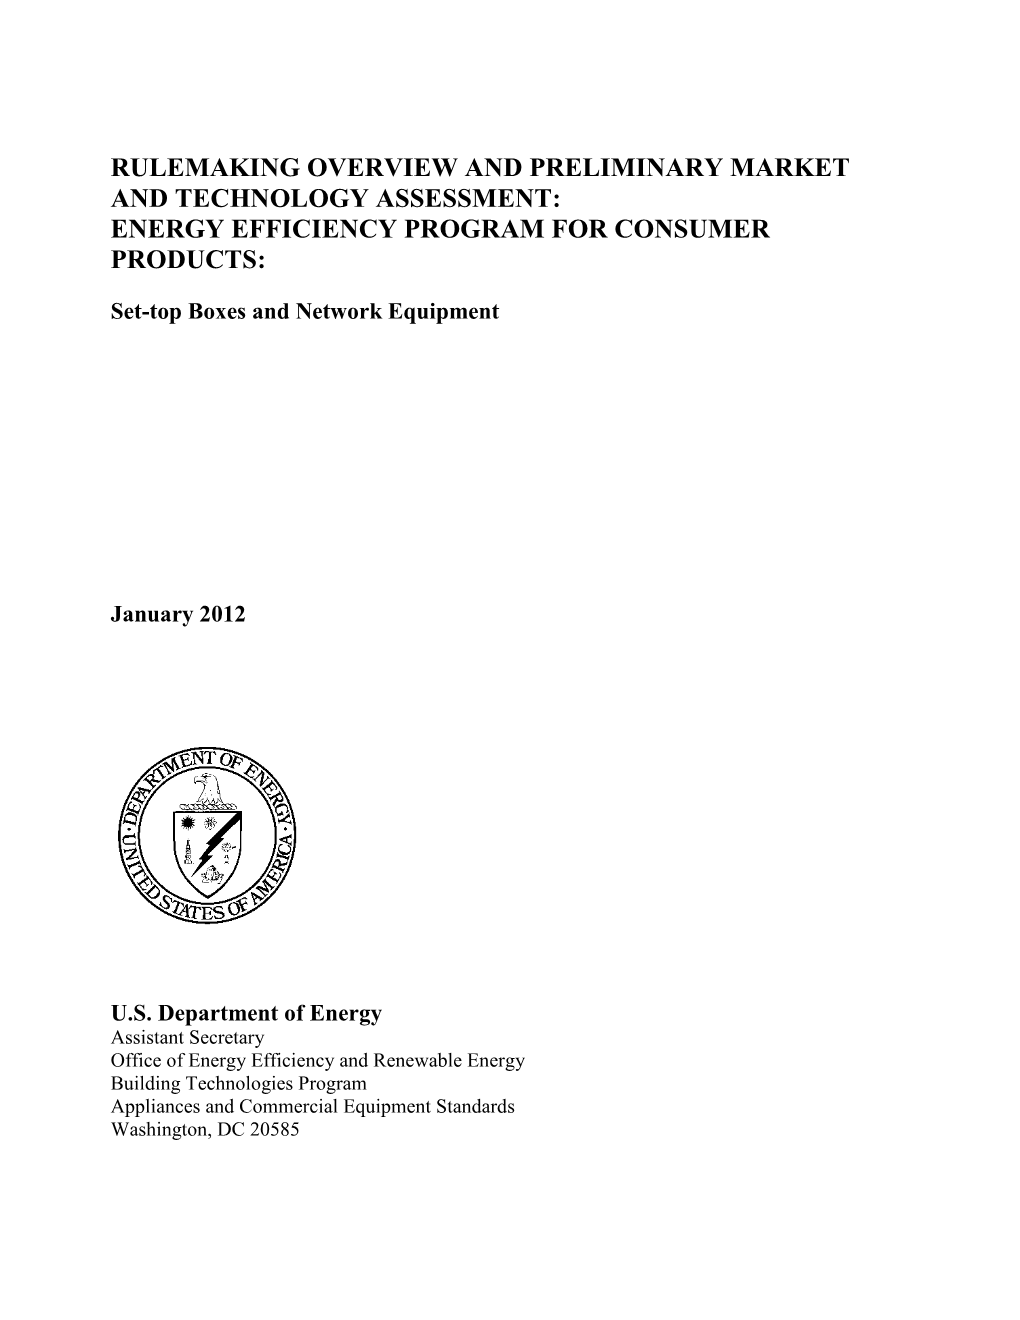 Rulemaking Overview and Preliminary Market and Technology Assessment: Energy Efficiency Program for Consumer Products